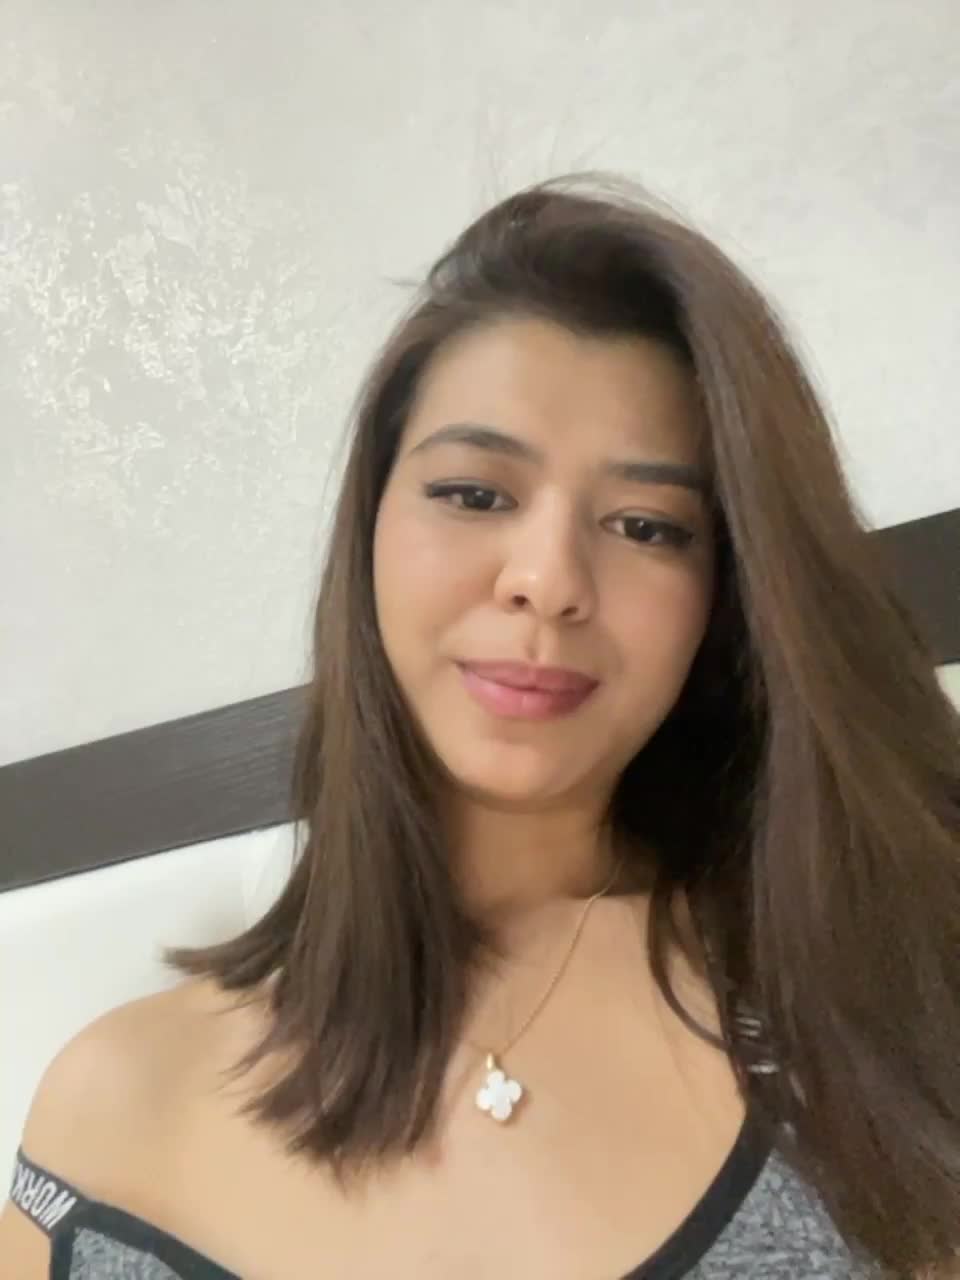 View or download file djulianaa on 2023-03-26 from bongacams